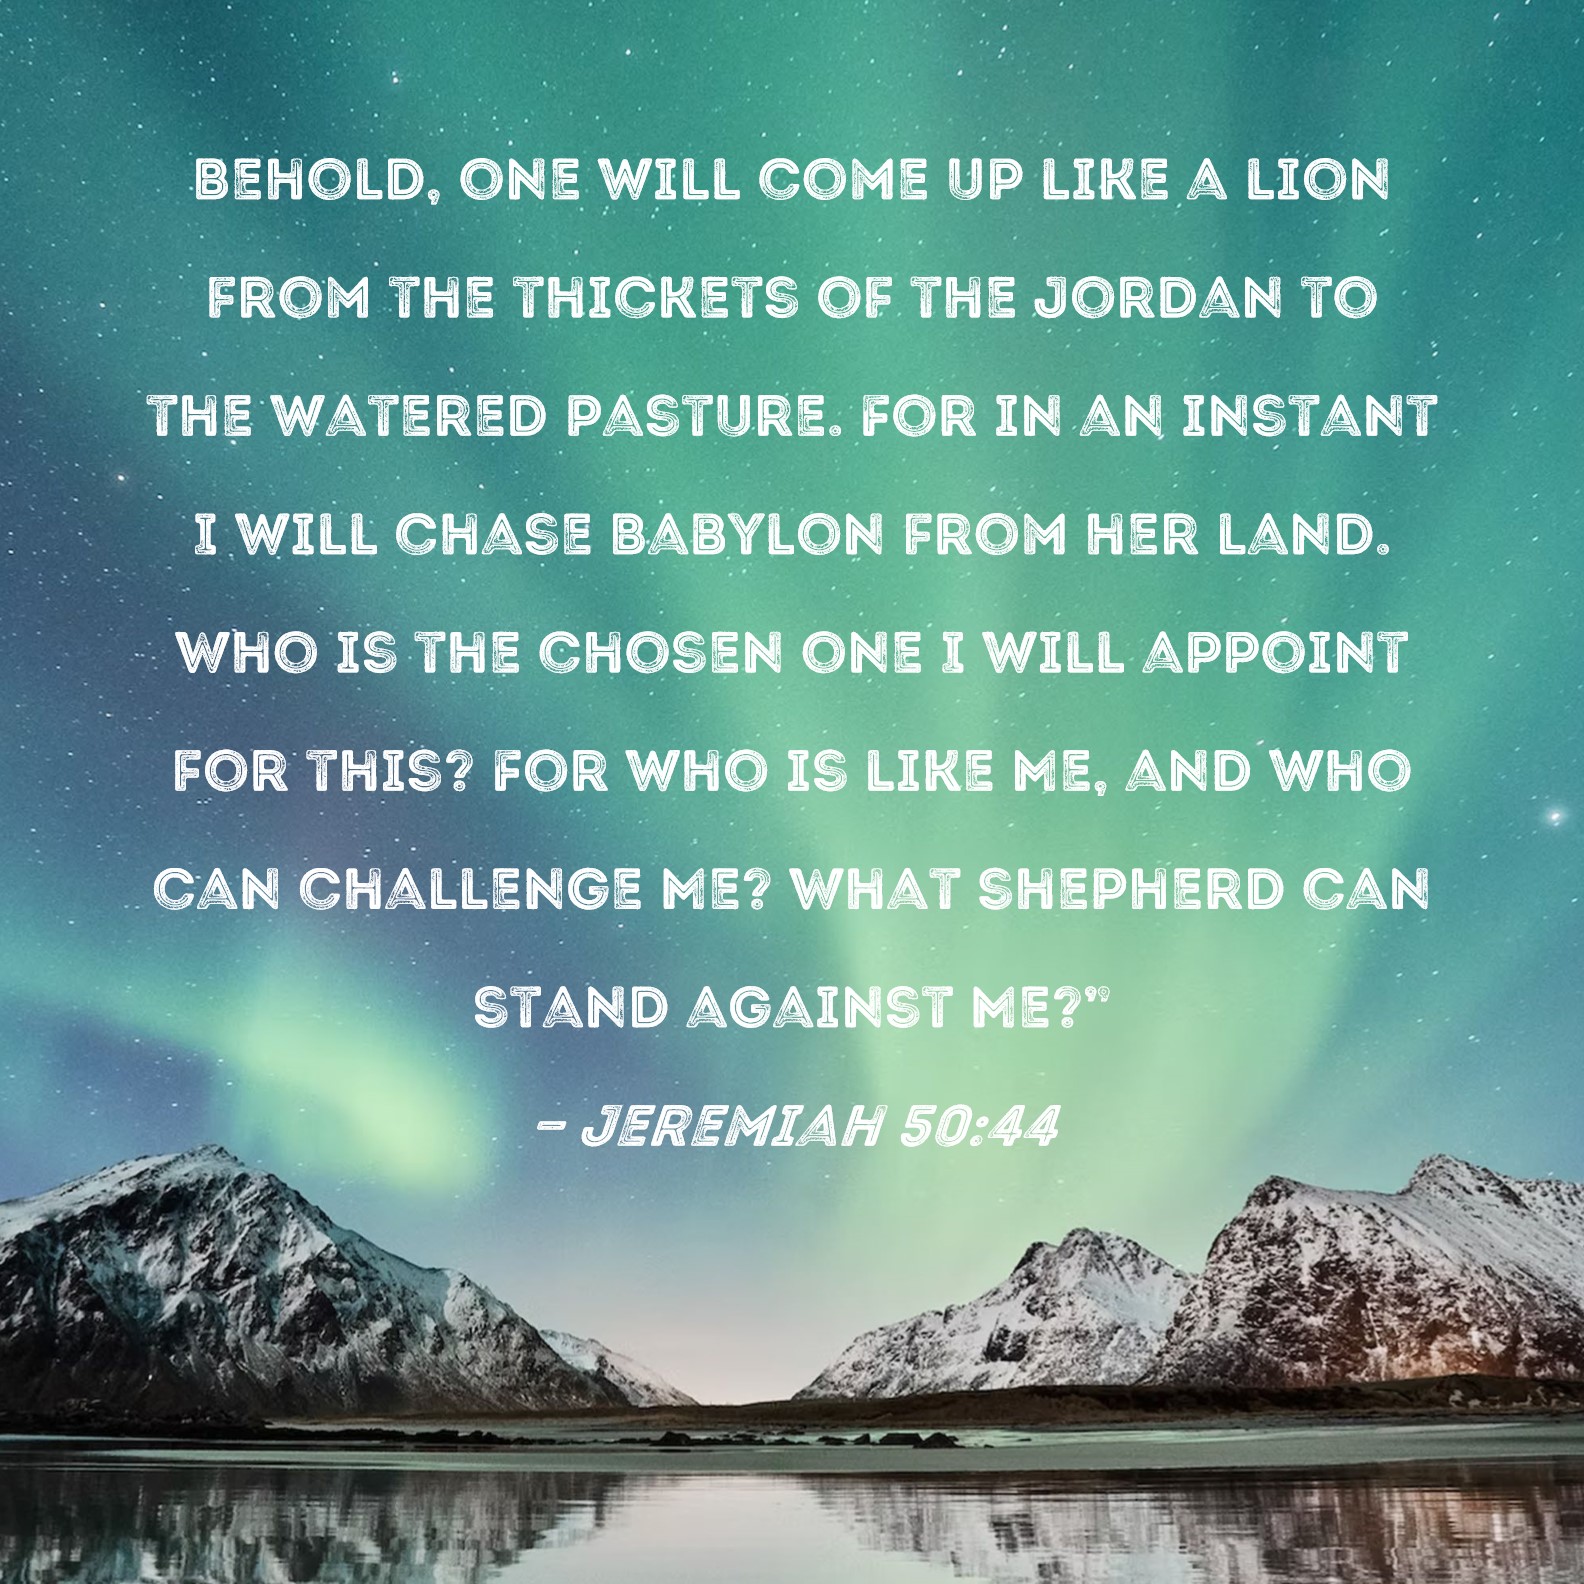 Jeremiah 50:44 Behold, one will come up like a lion from the